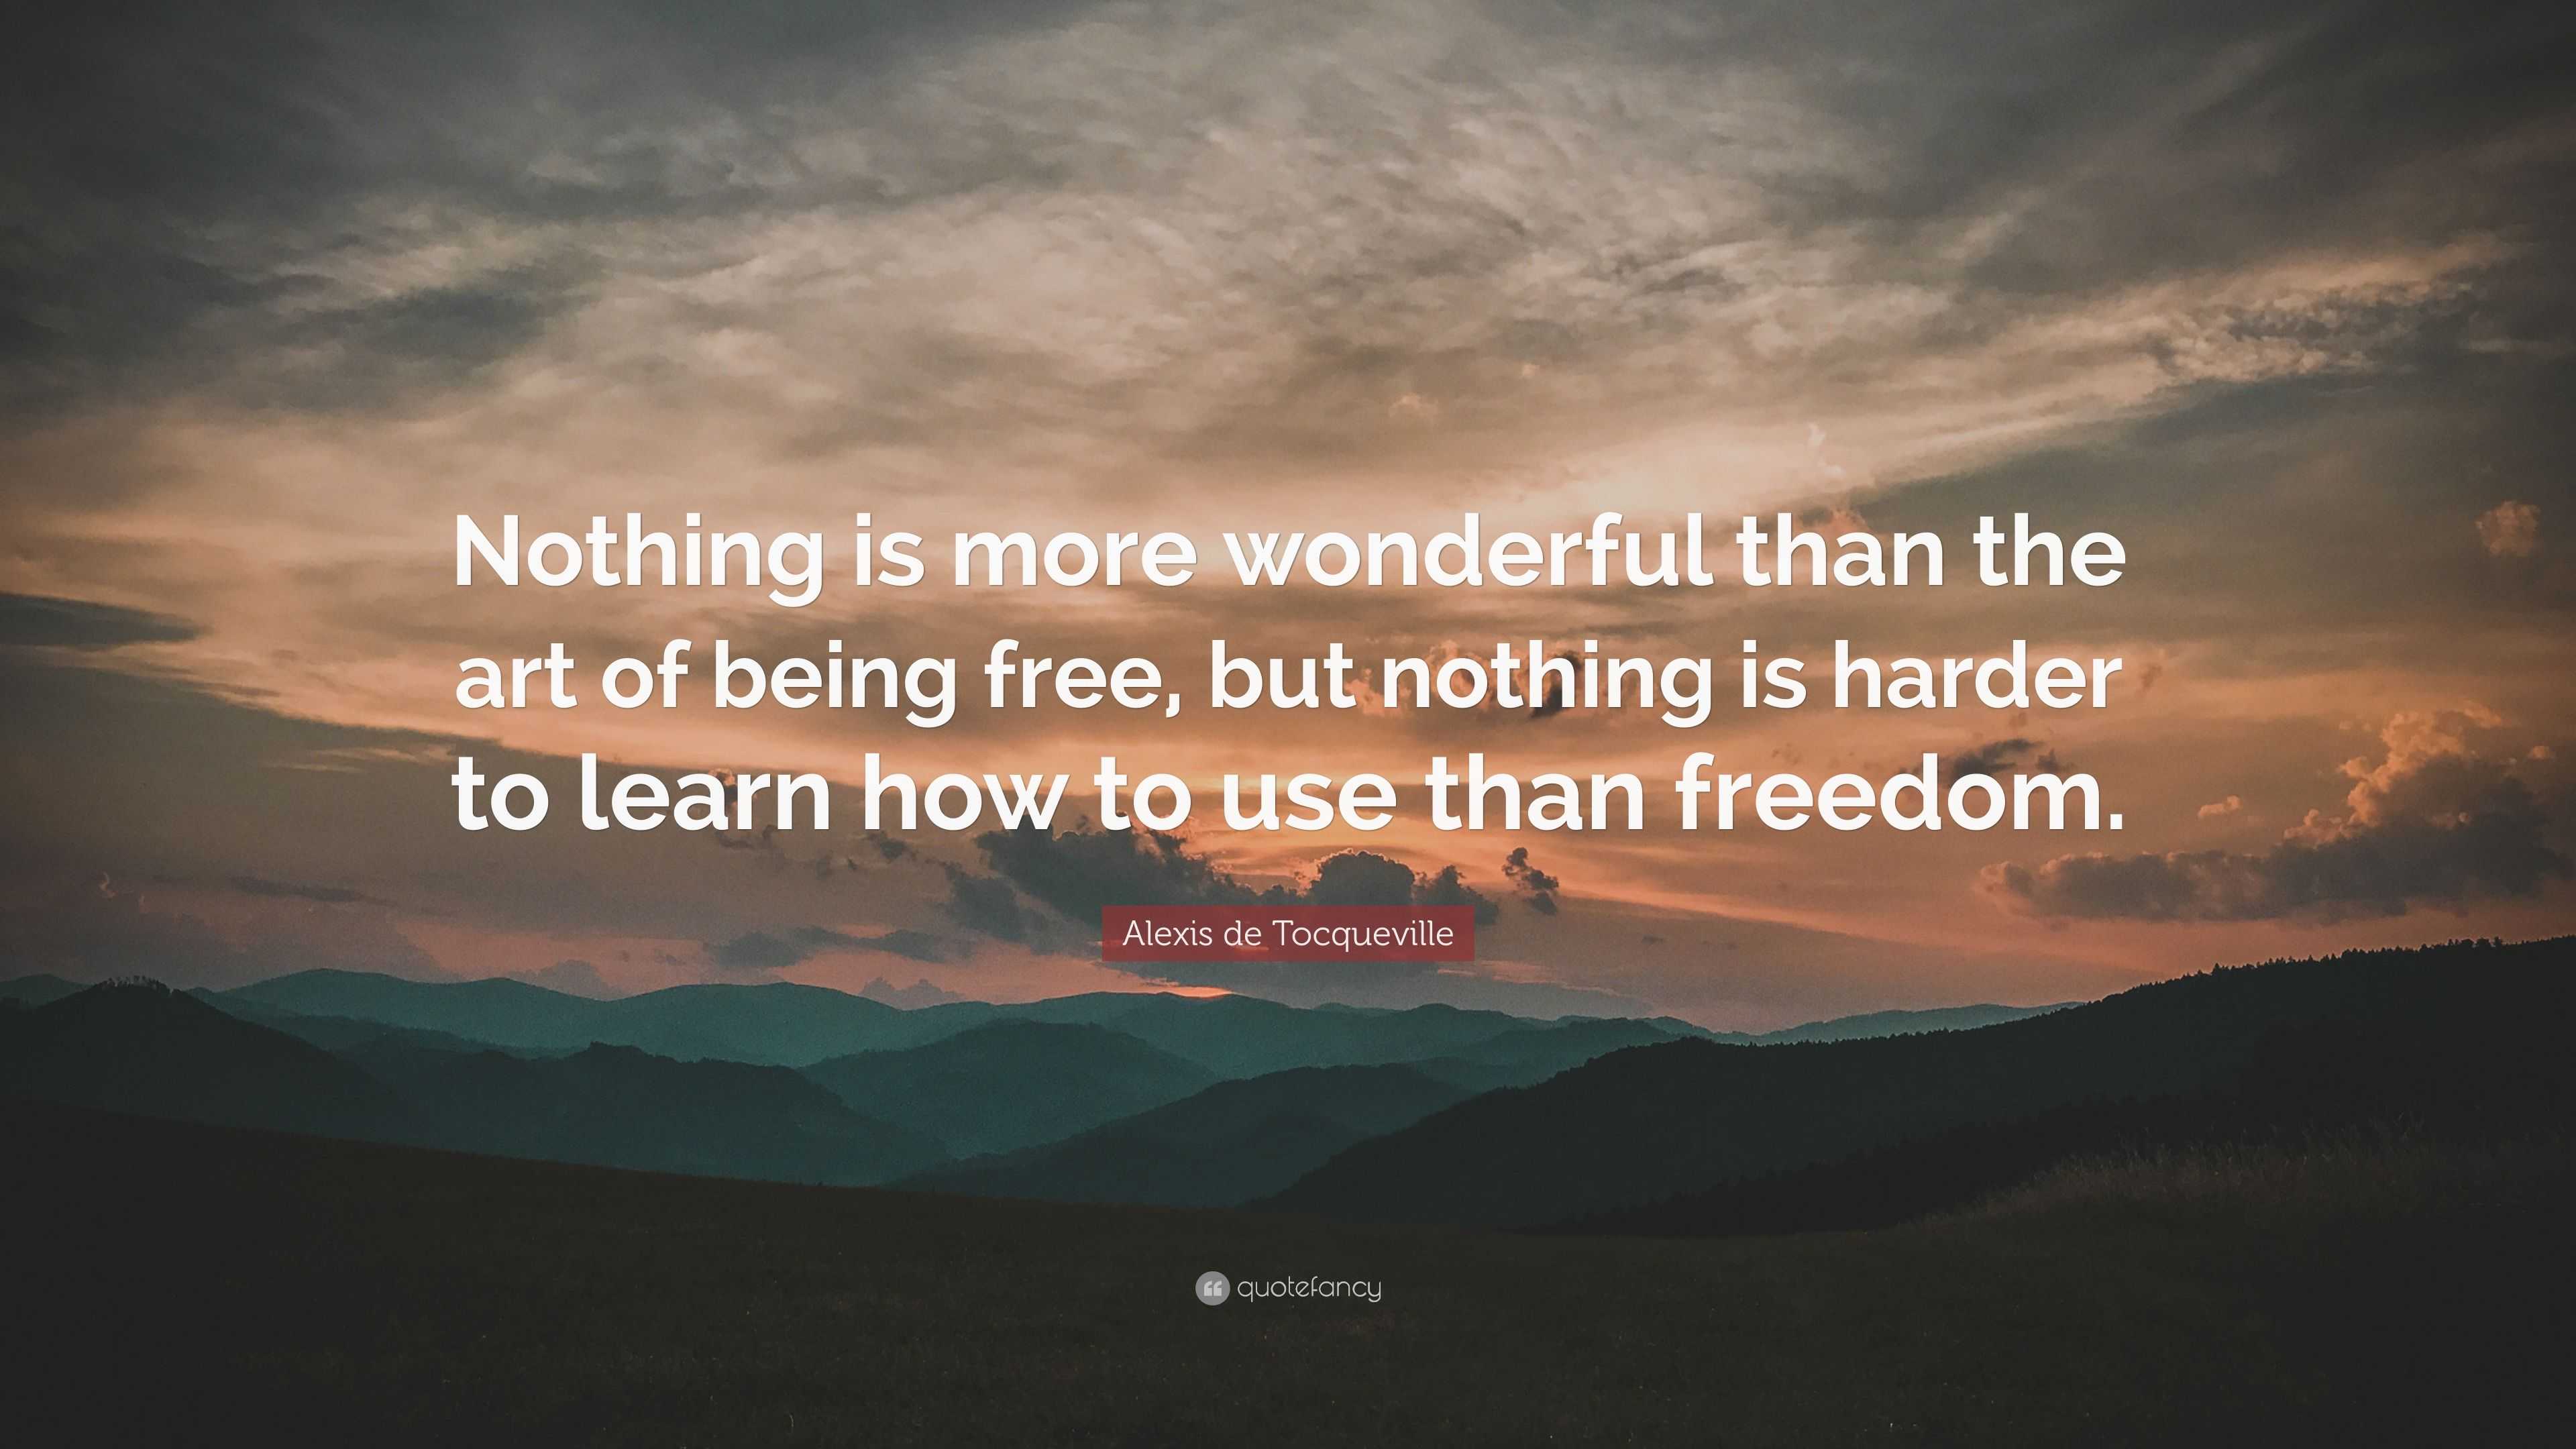 Alexis De Tocqueville Quote “nothing Is More Wonderful Than The Art Of Being Free But Nothing 1198